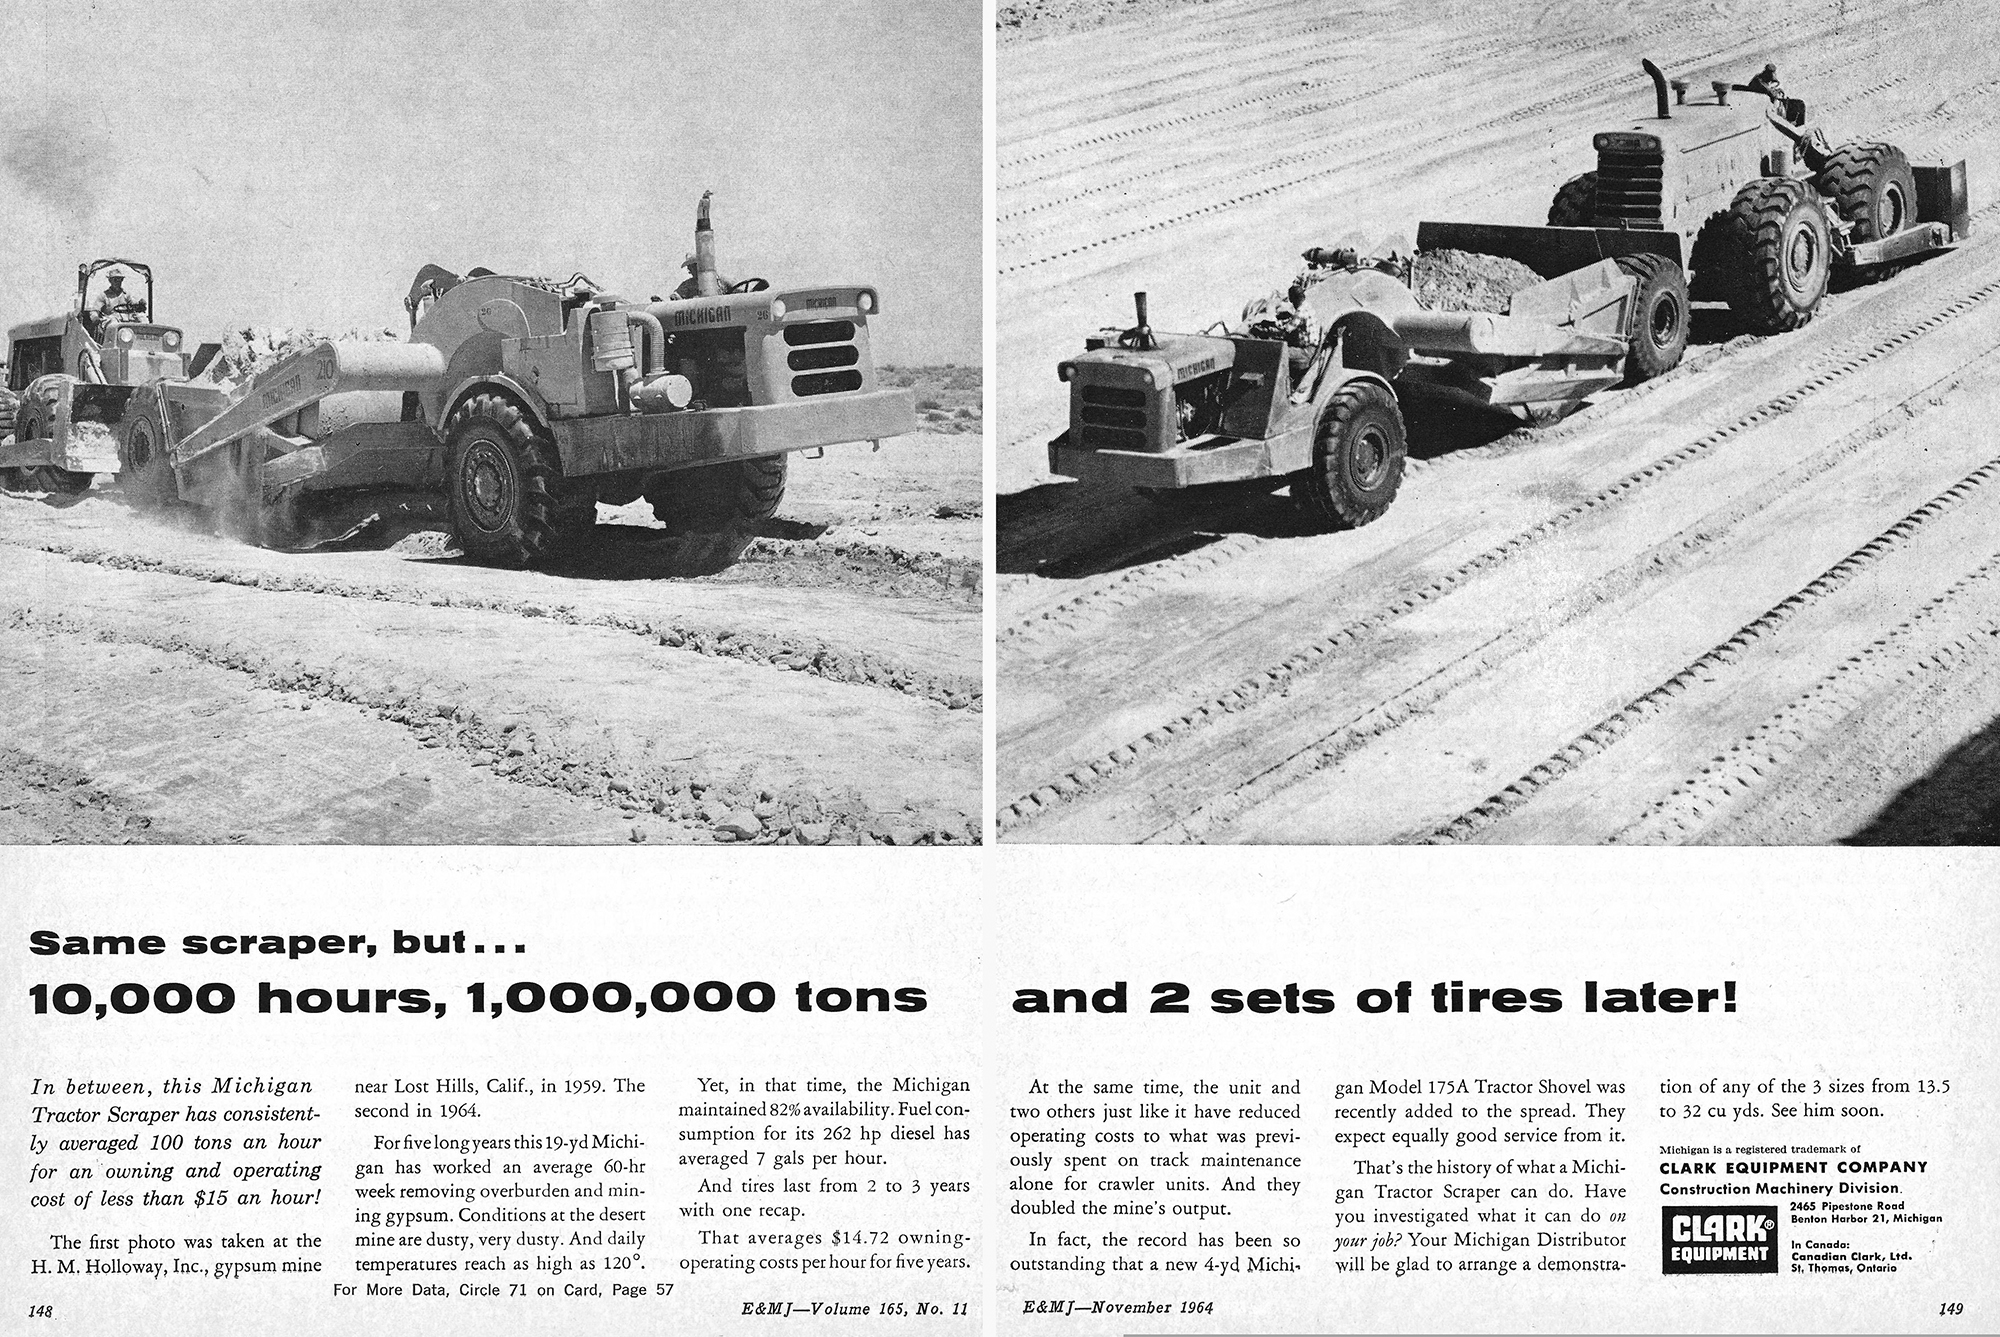 Clark Equipment ad from Engineering and Mining Journal in November 1964 highlights Holloway’s Lost Hills Mine